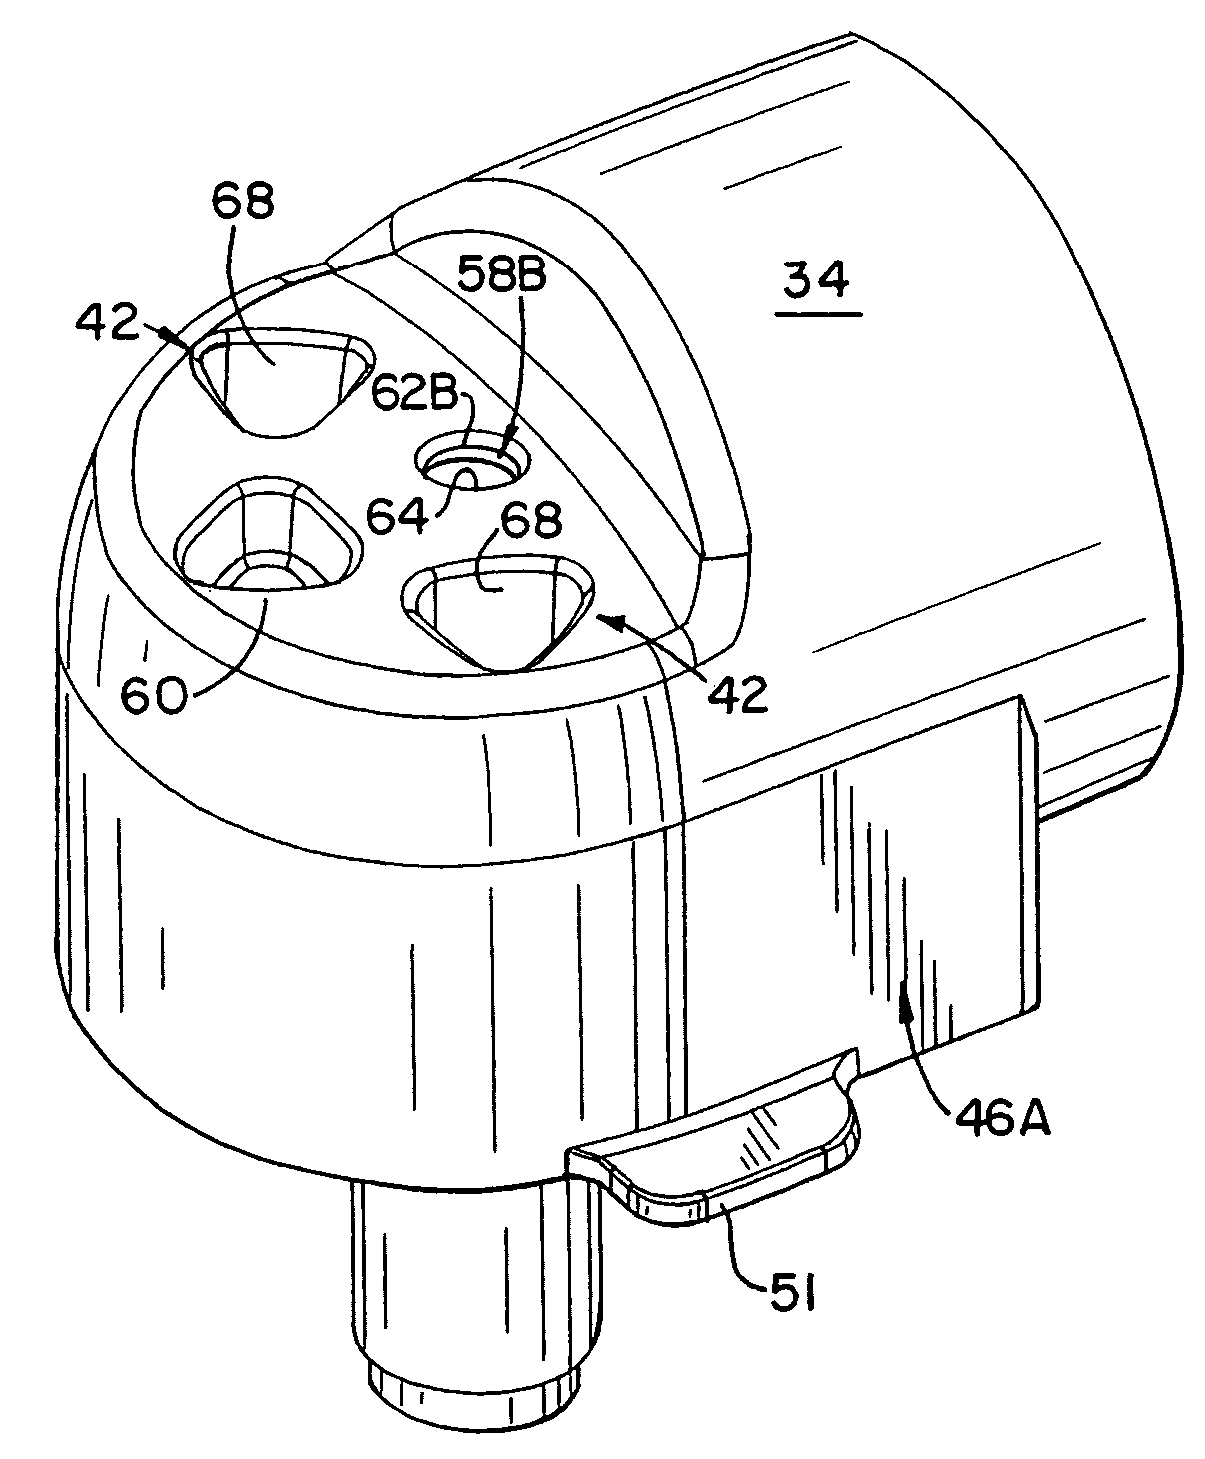 Connector device